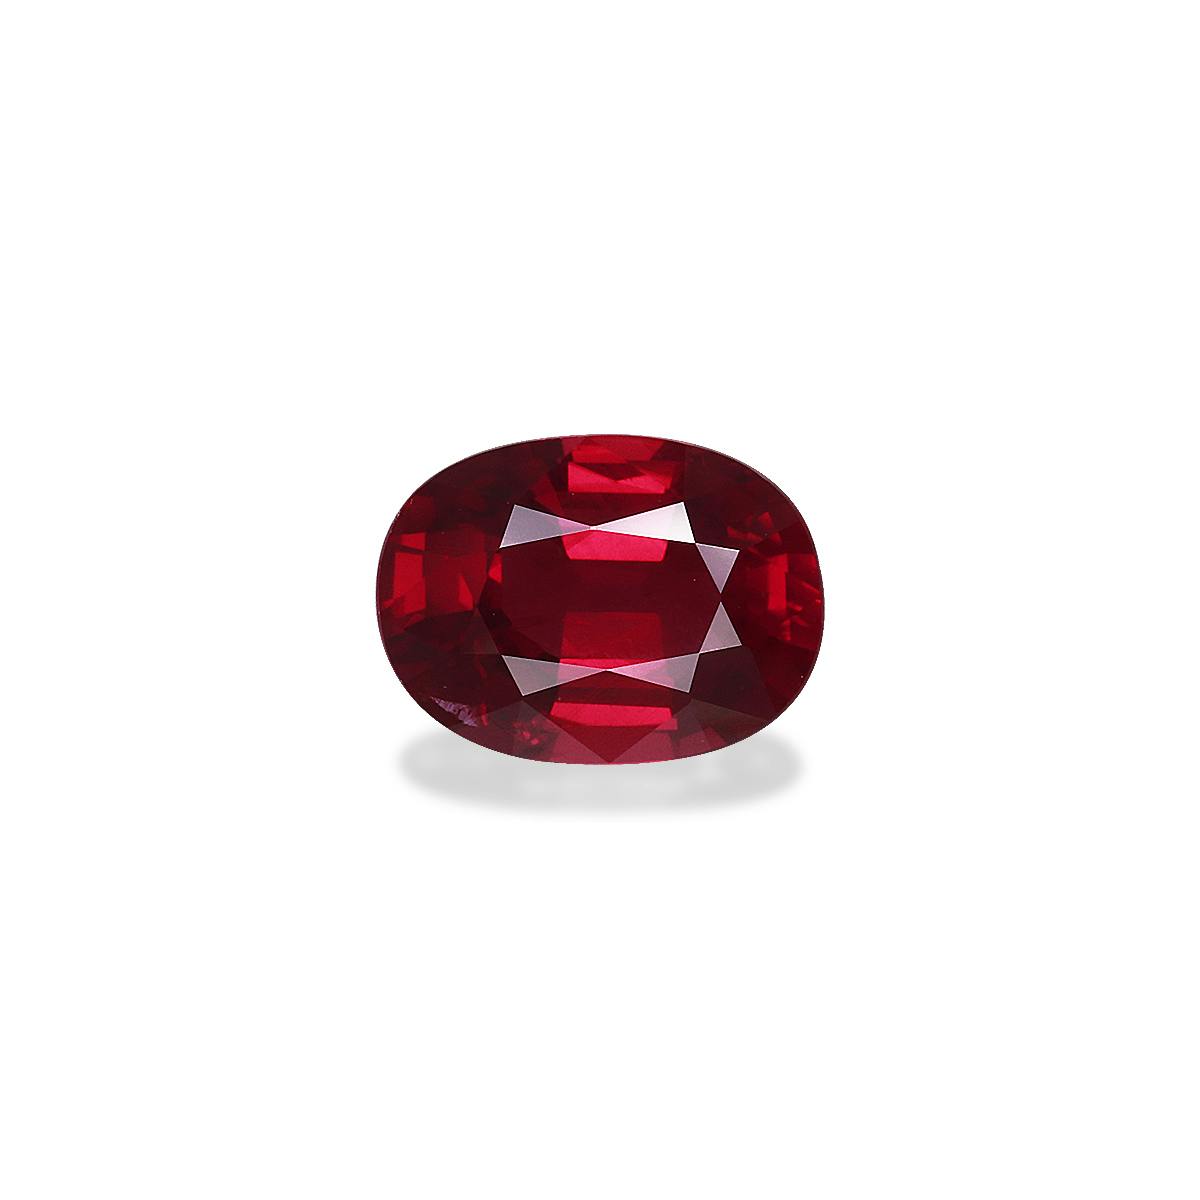 Details about   4.50 Ct Natural Mozambique Red Ruby Square Cushion Cut Loose Certified Gemstone 